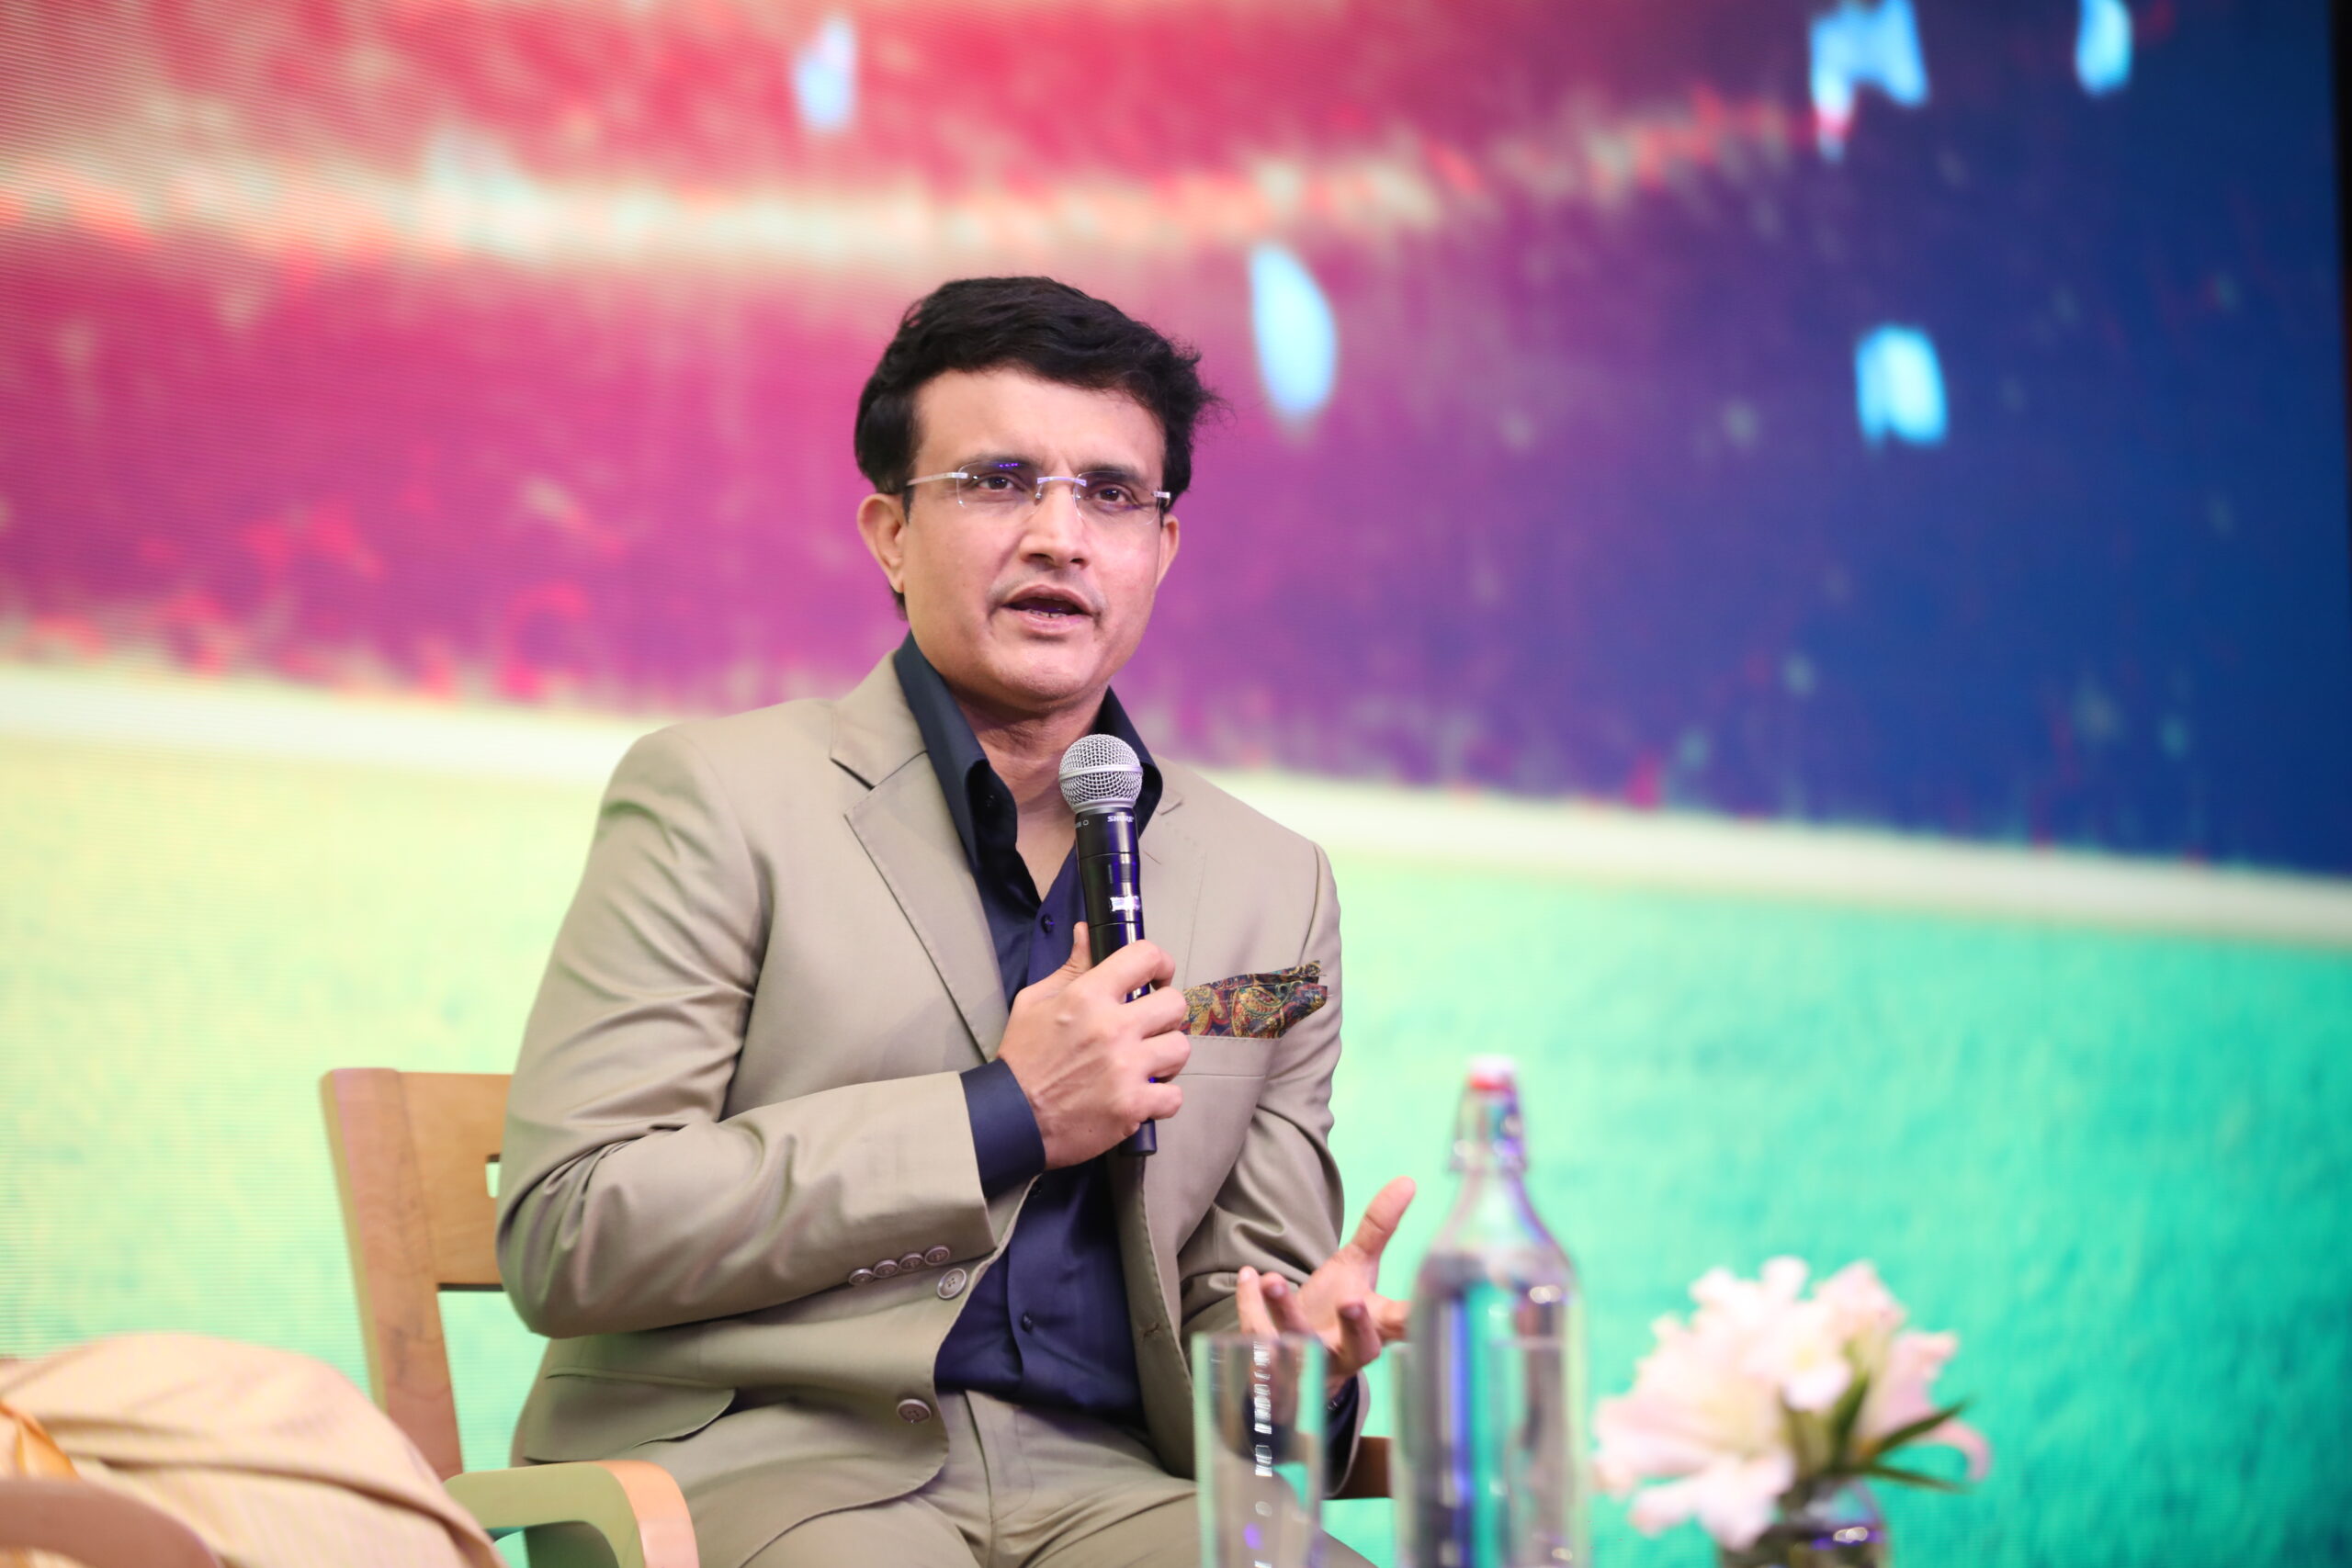 Sourav Ganguly as a Motivational Speaker at a corporate event in Mumbai